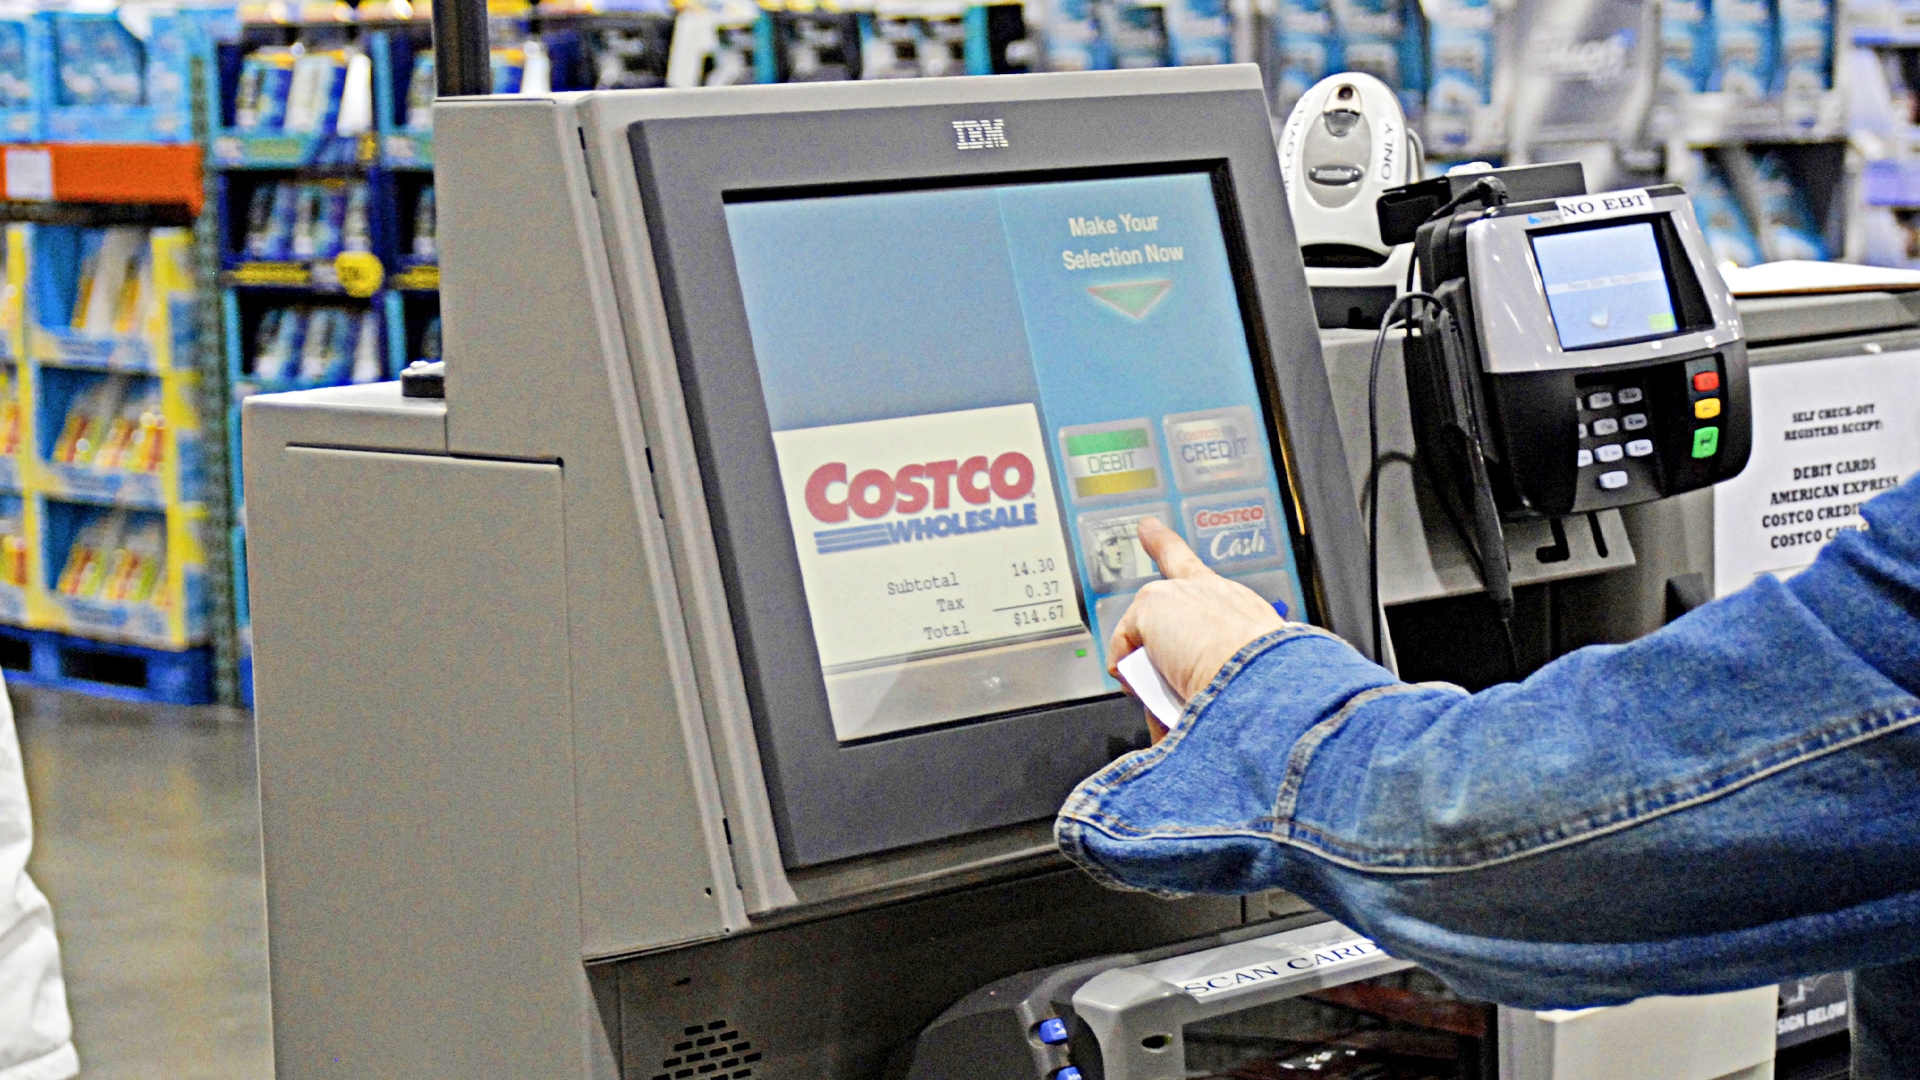 During an earnings call on Thursday, Costco's Chief Financial Officer (CFO), Richard Galanti, expressed the company's positive position regarding theft.